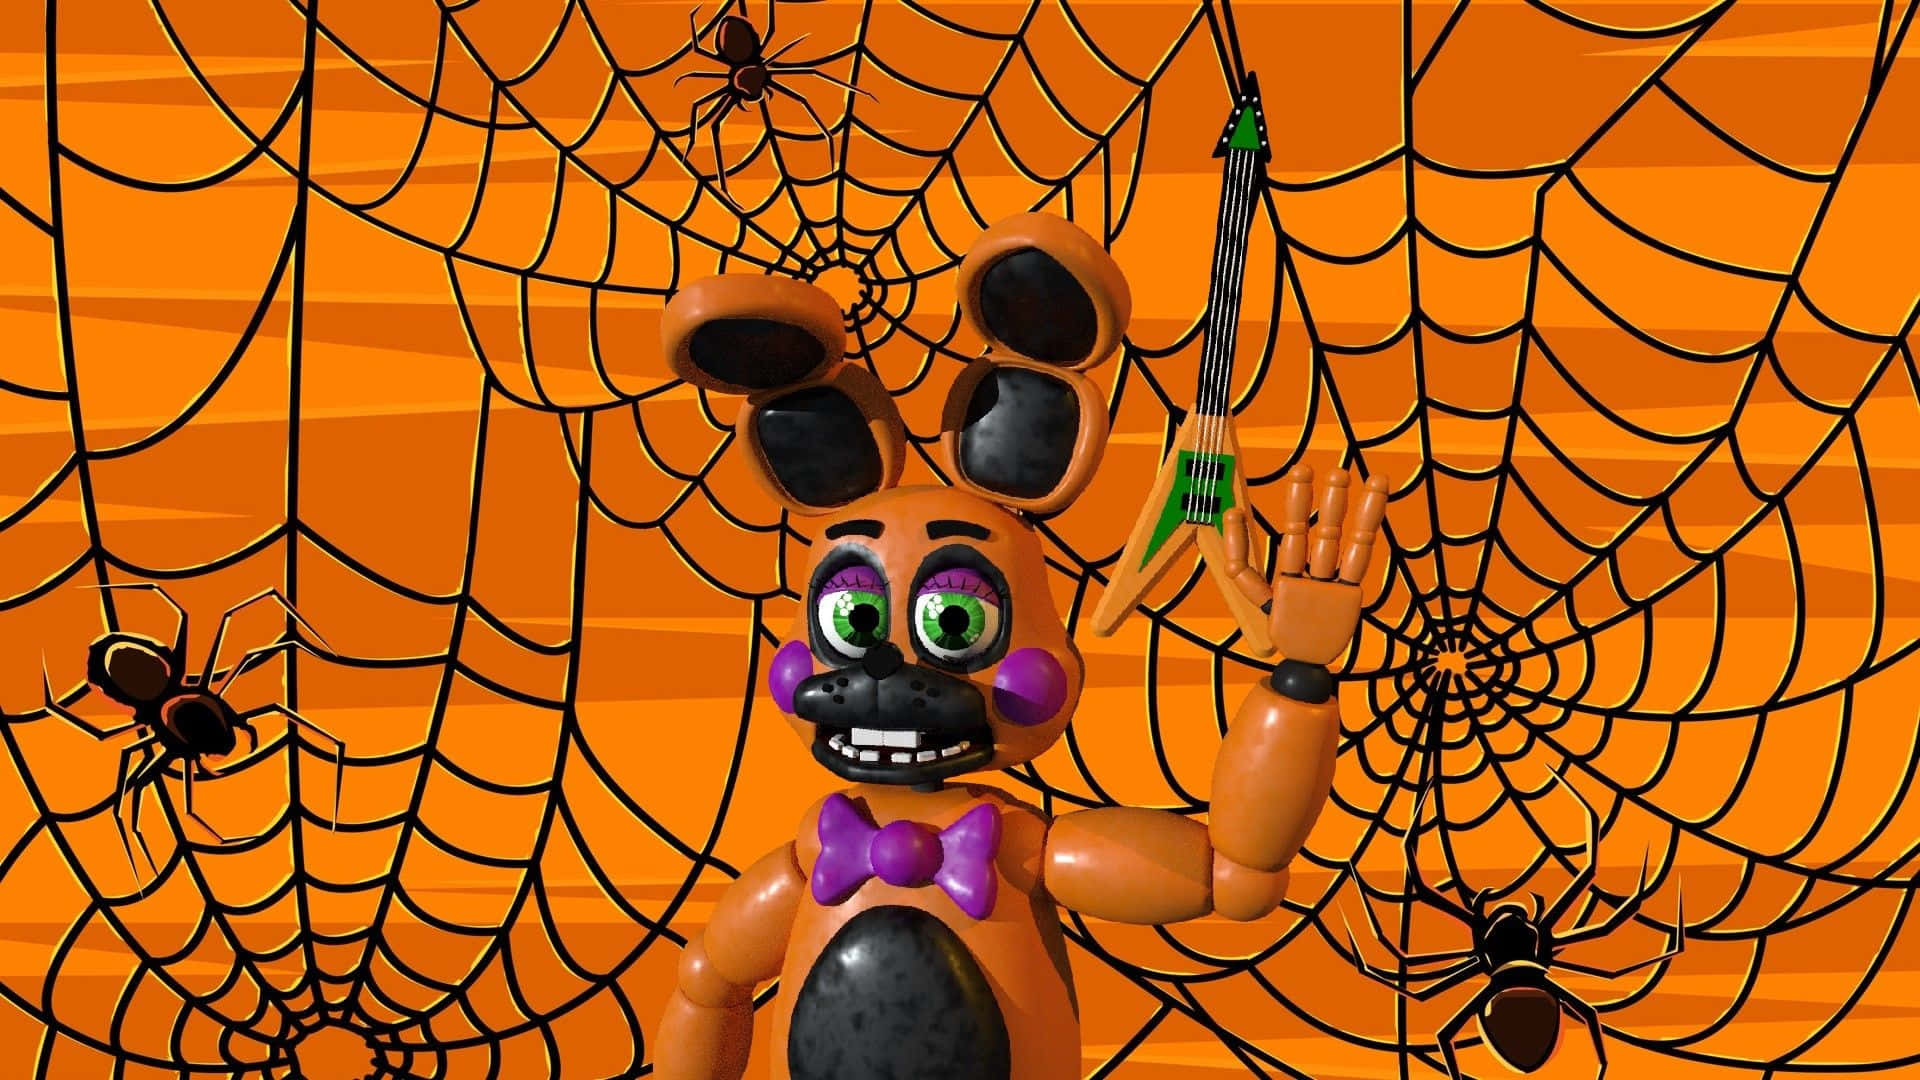 A Halloween Stuffed Animal With A Spider Web Wallpaper